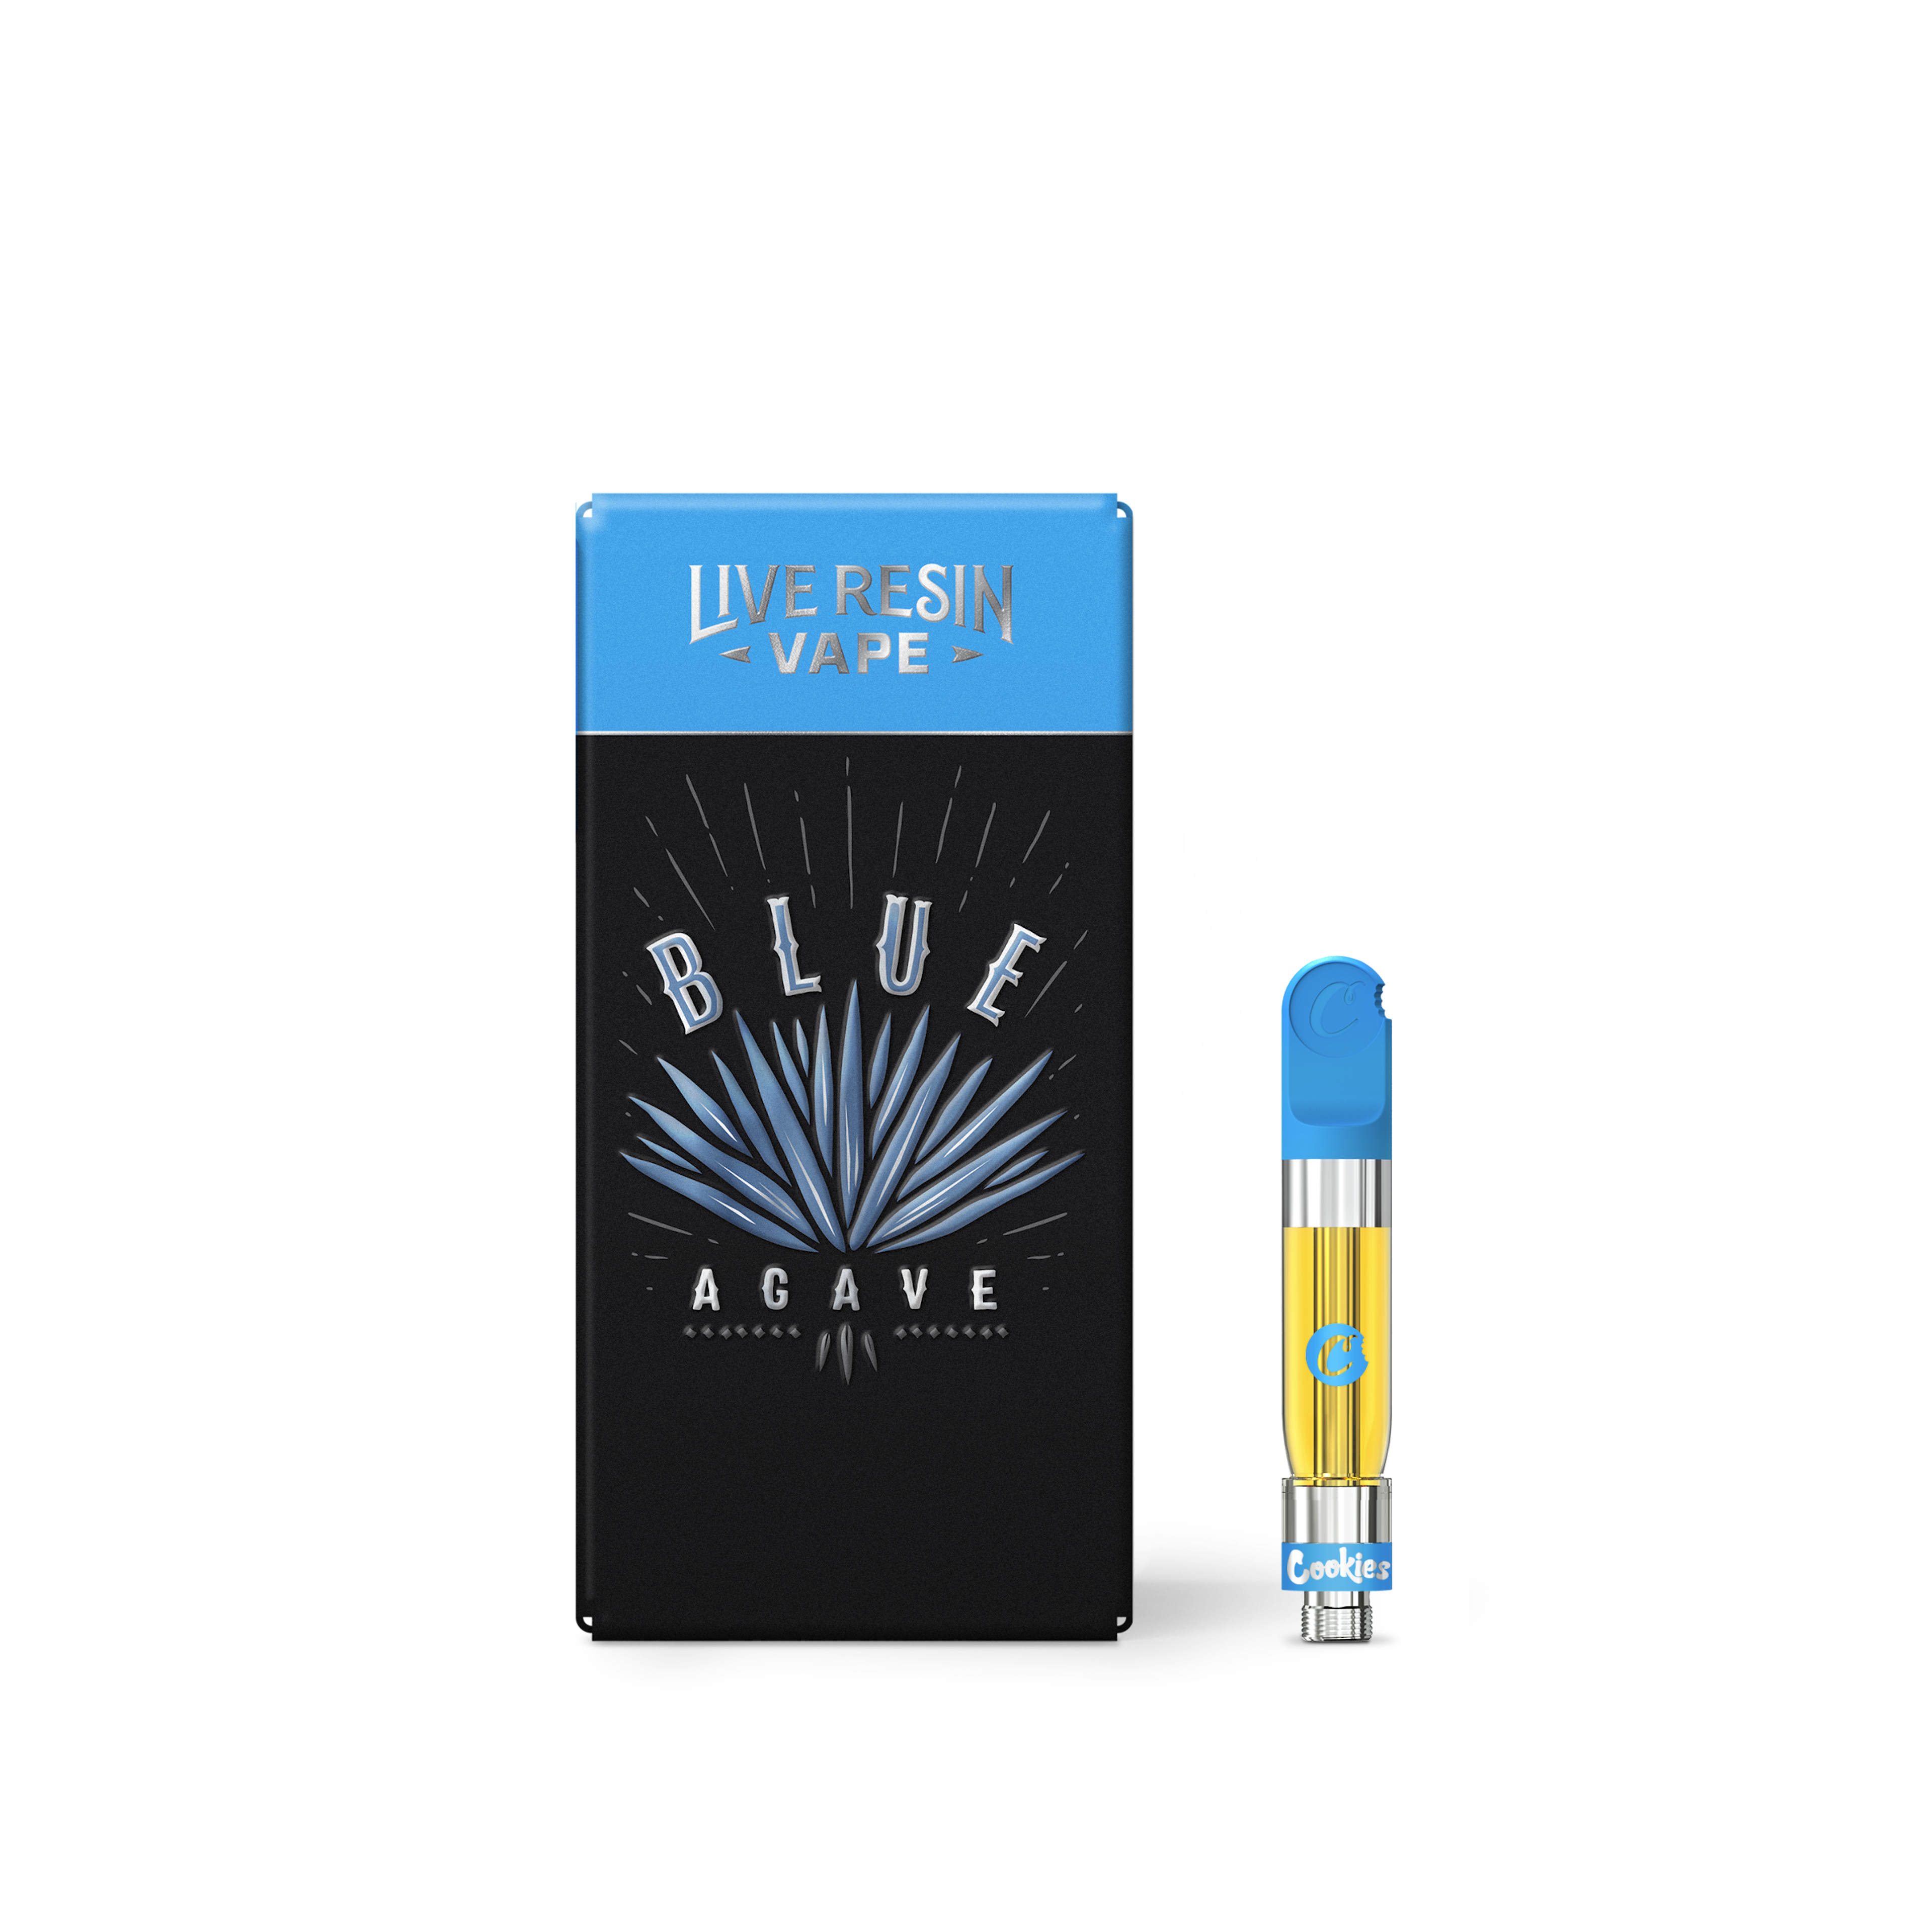 Cookies - Blue Agave - THC - Live Resin - Cartridge - Vape - 510 - Tube - Pouch - 1g - CA